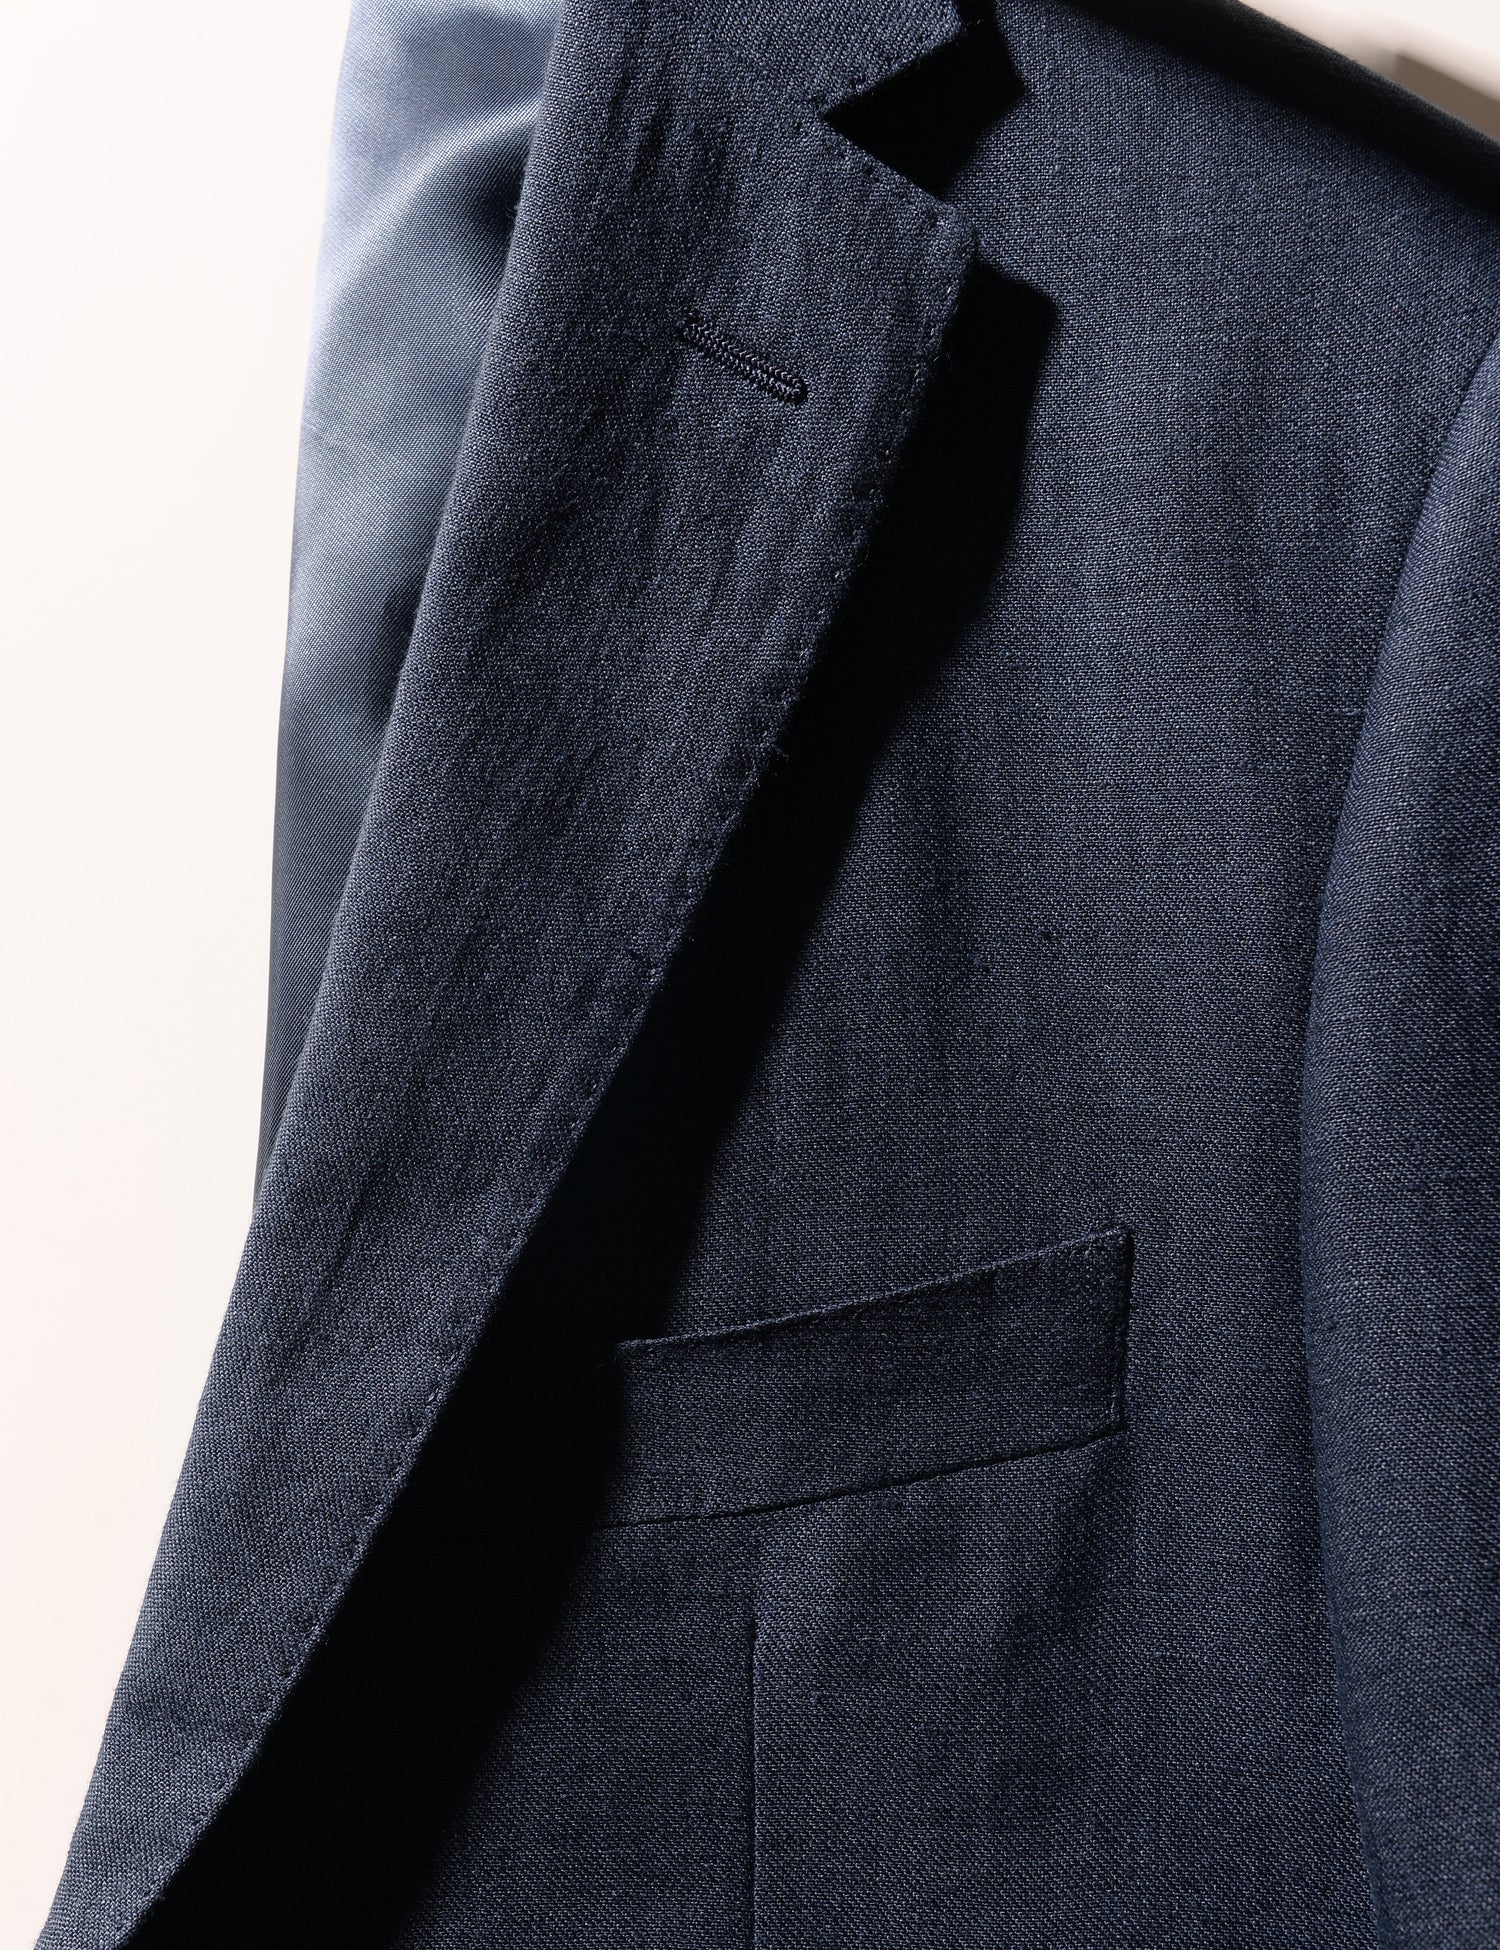 Detail shot of Brooklyn Tailors BKT50 Tailored Jacket in Linen Twill - Salerno Blue showing lapel and chest pocket